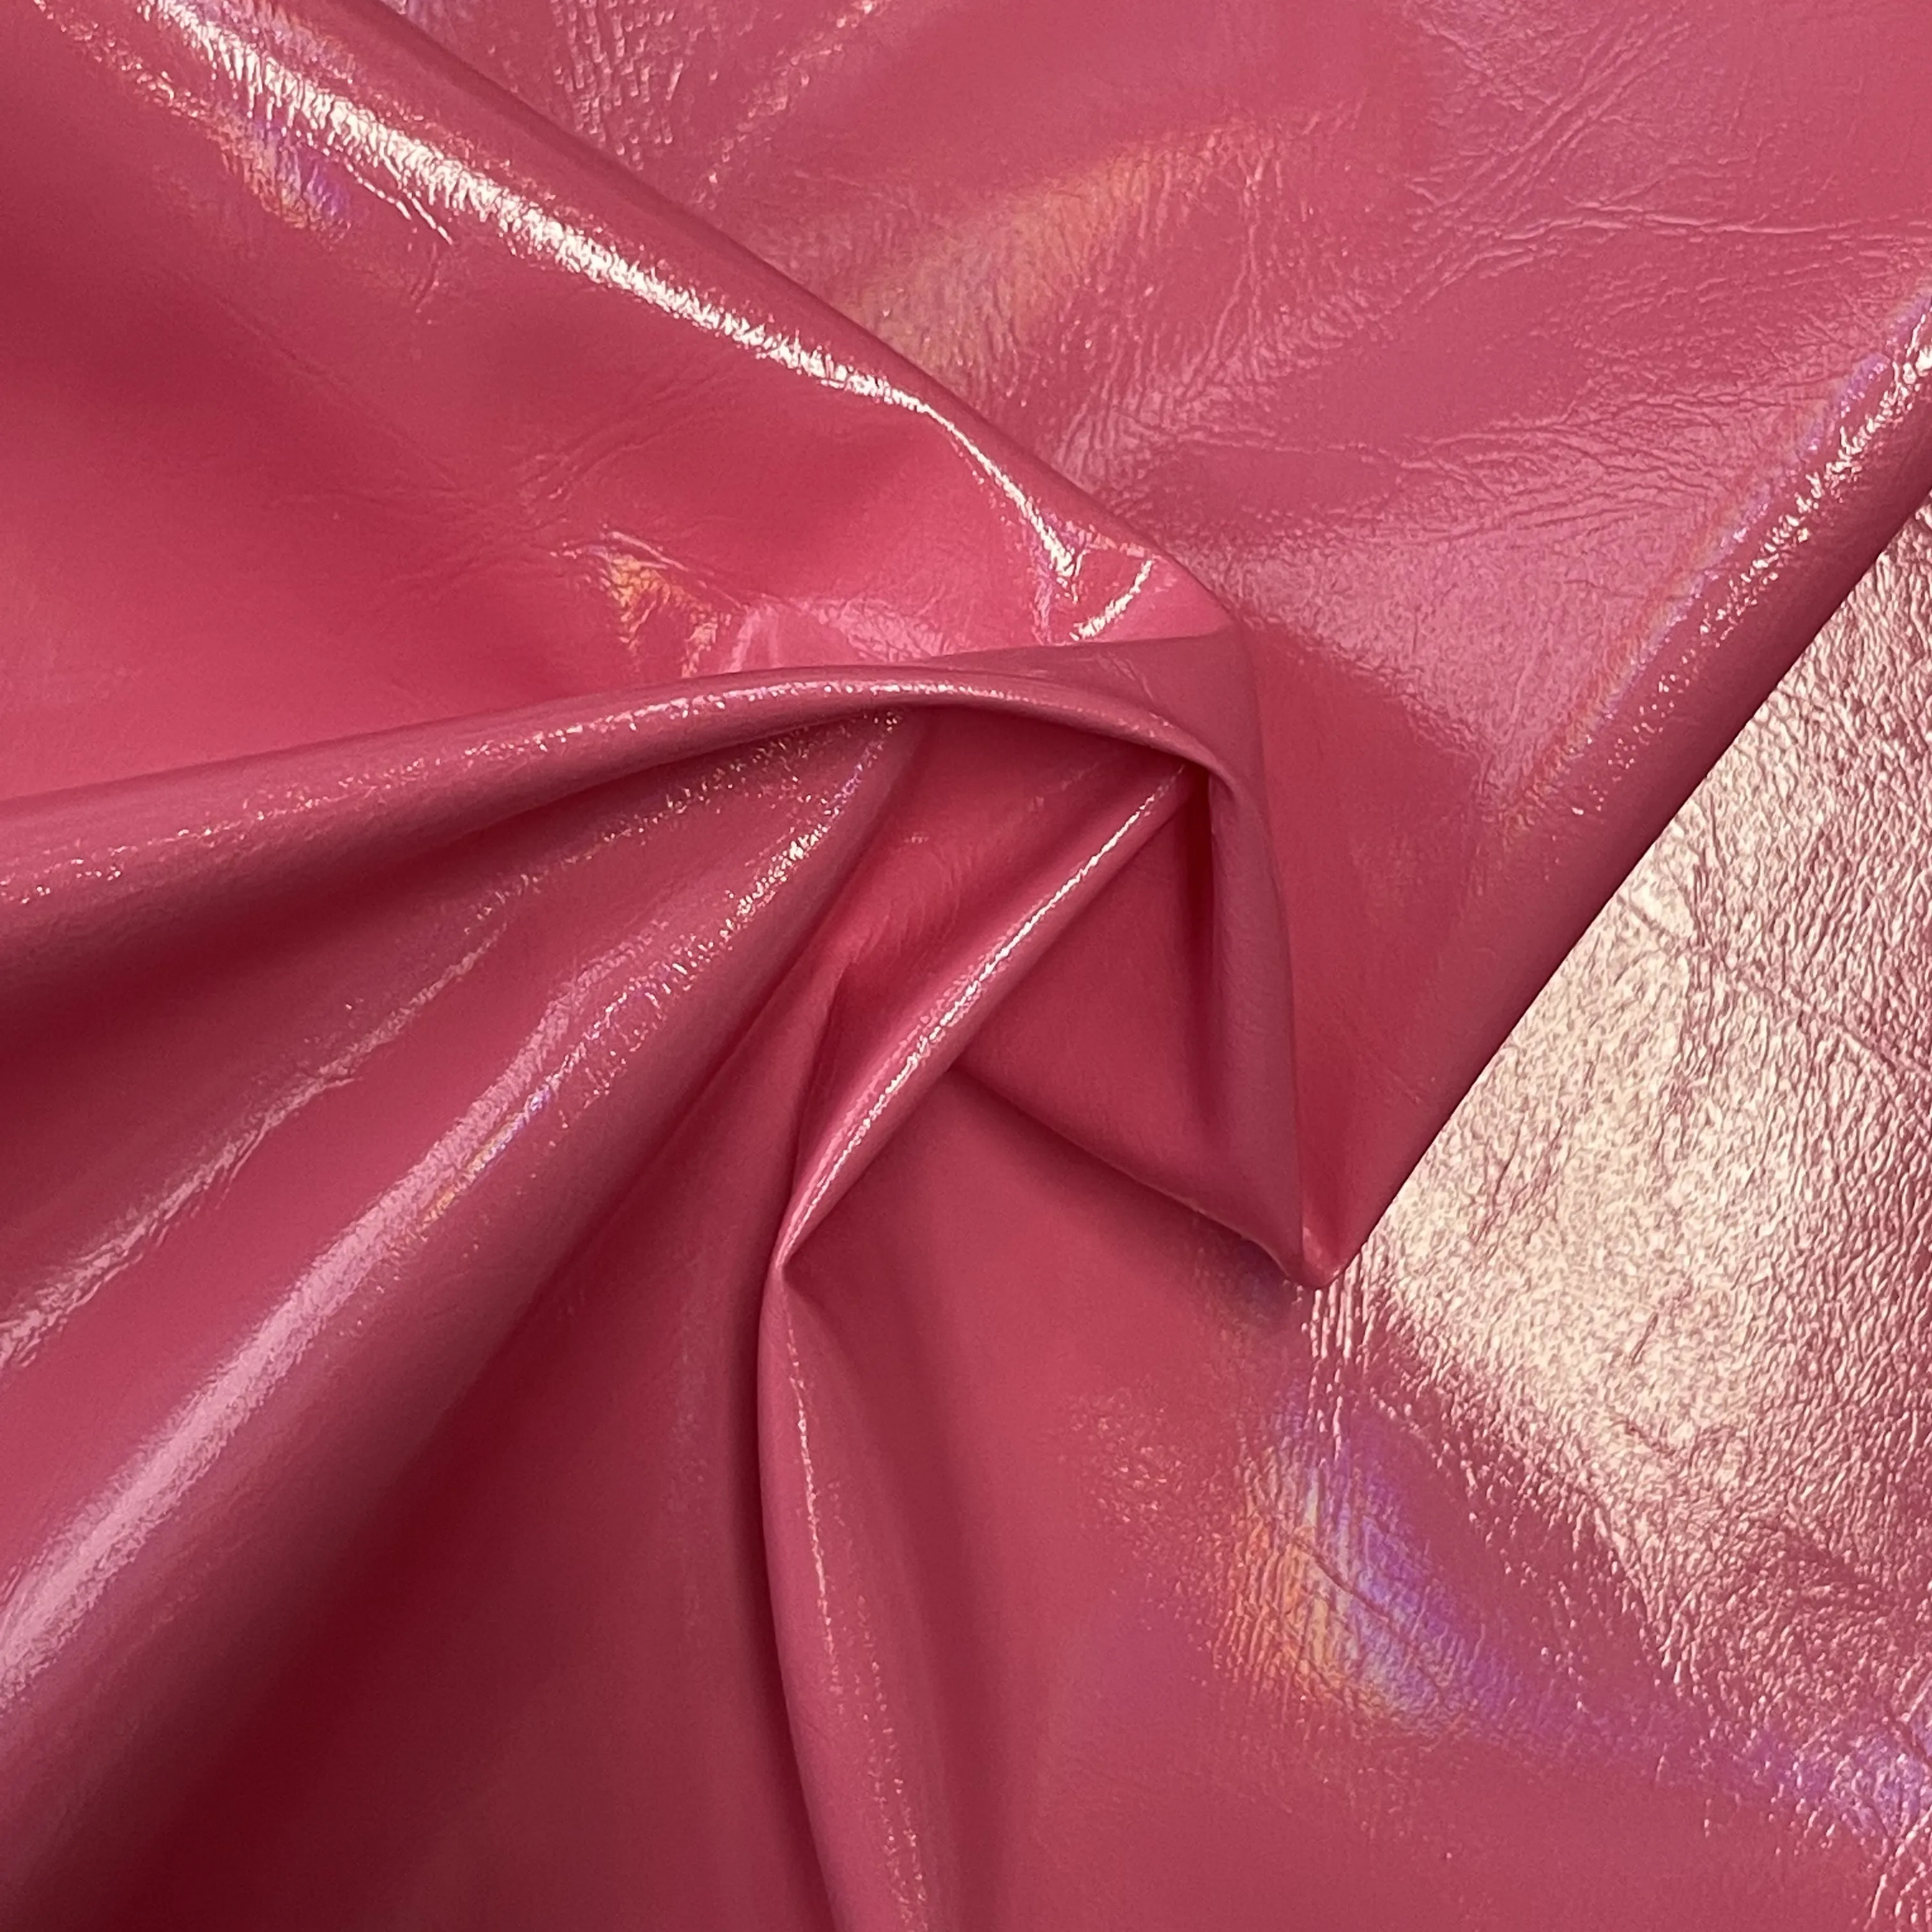 Smooth Glossy PU Faux Leather Is Used For Clothing Fabrics